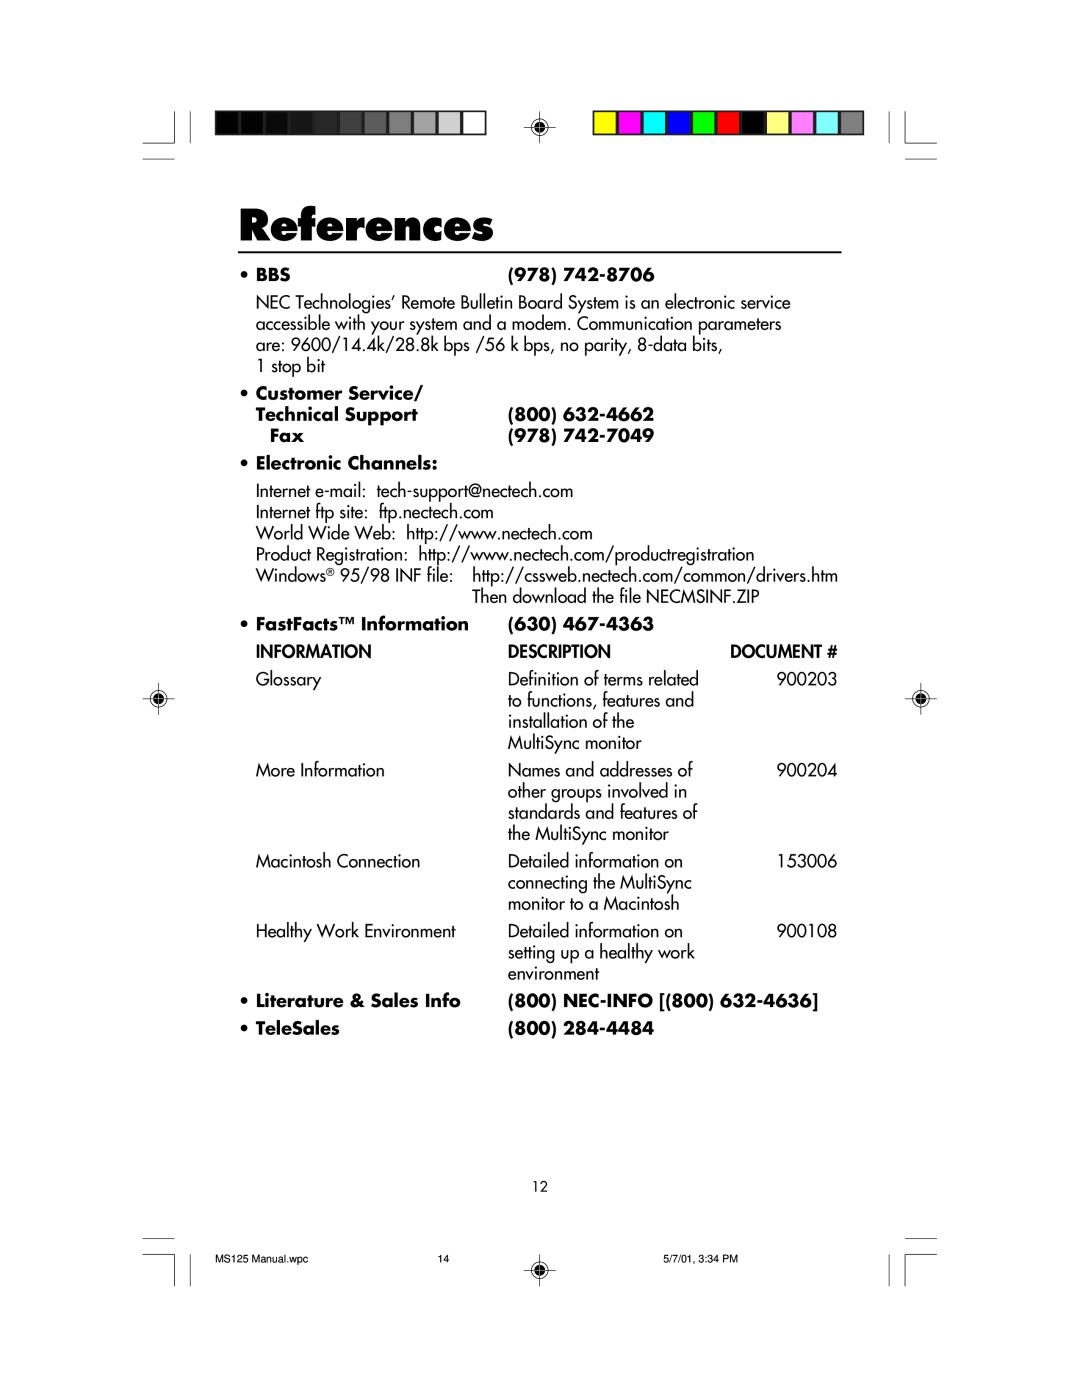 NEC MS125 manual References 